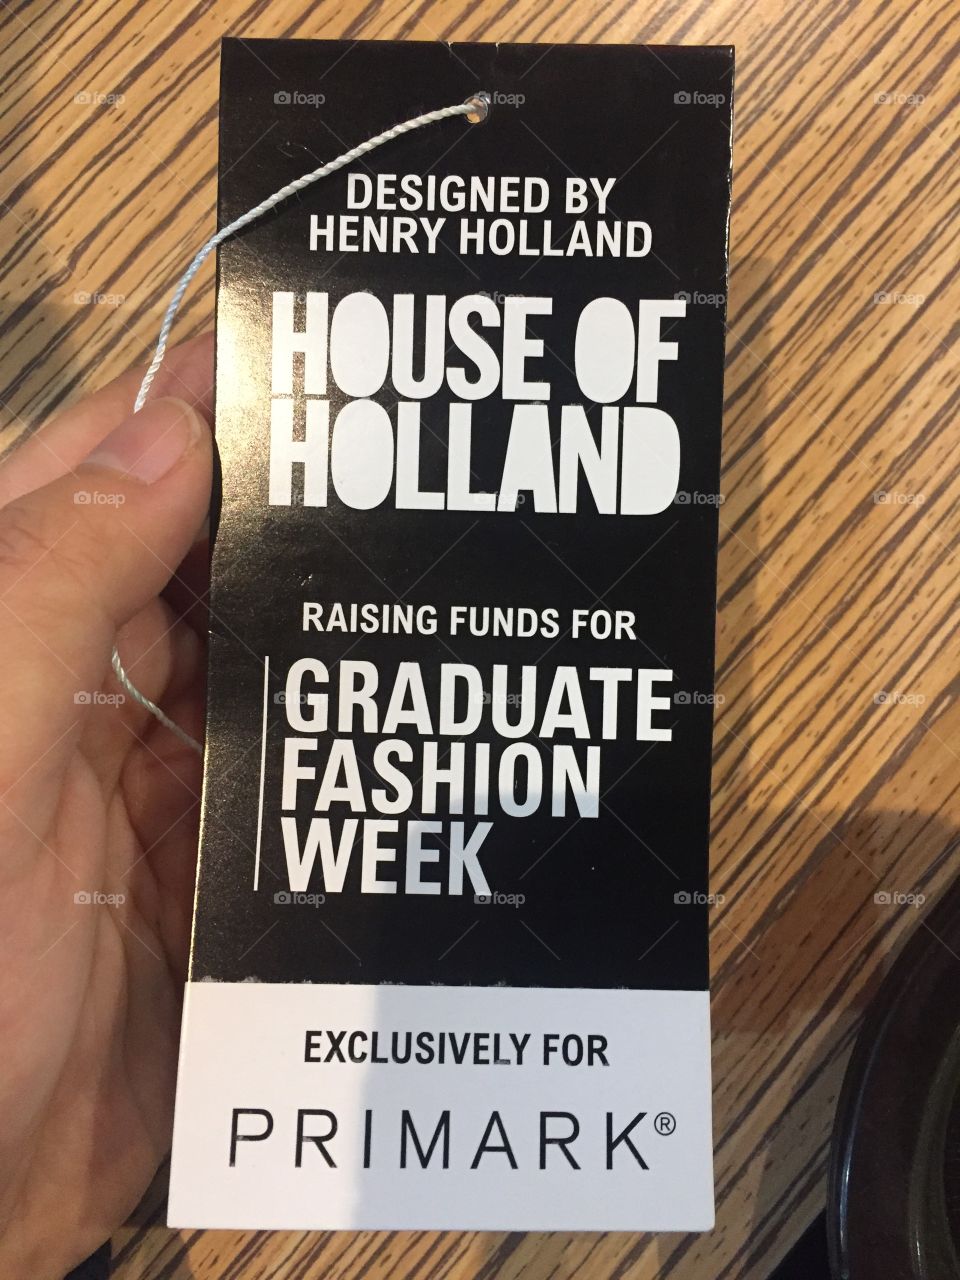 This is a shopping bag tag that took my interest as I never knew for Graduate Fashion Week to raise money this way. 